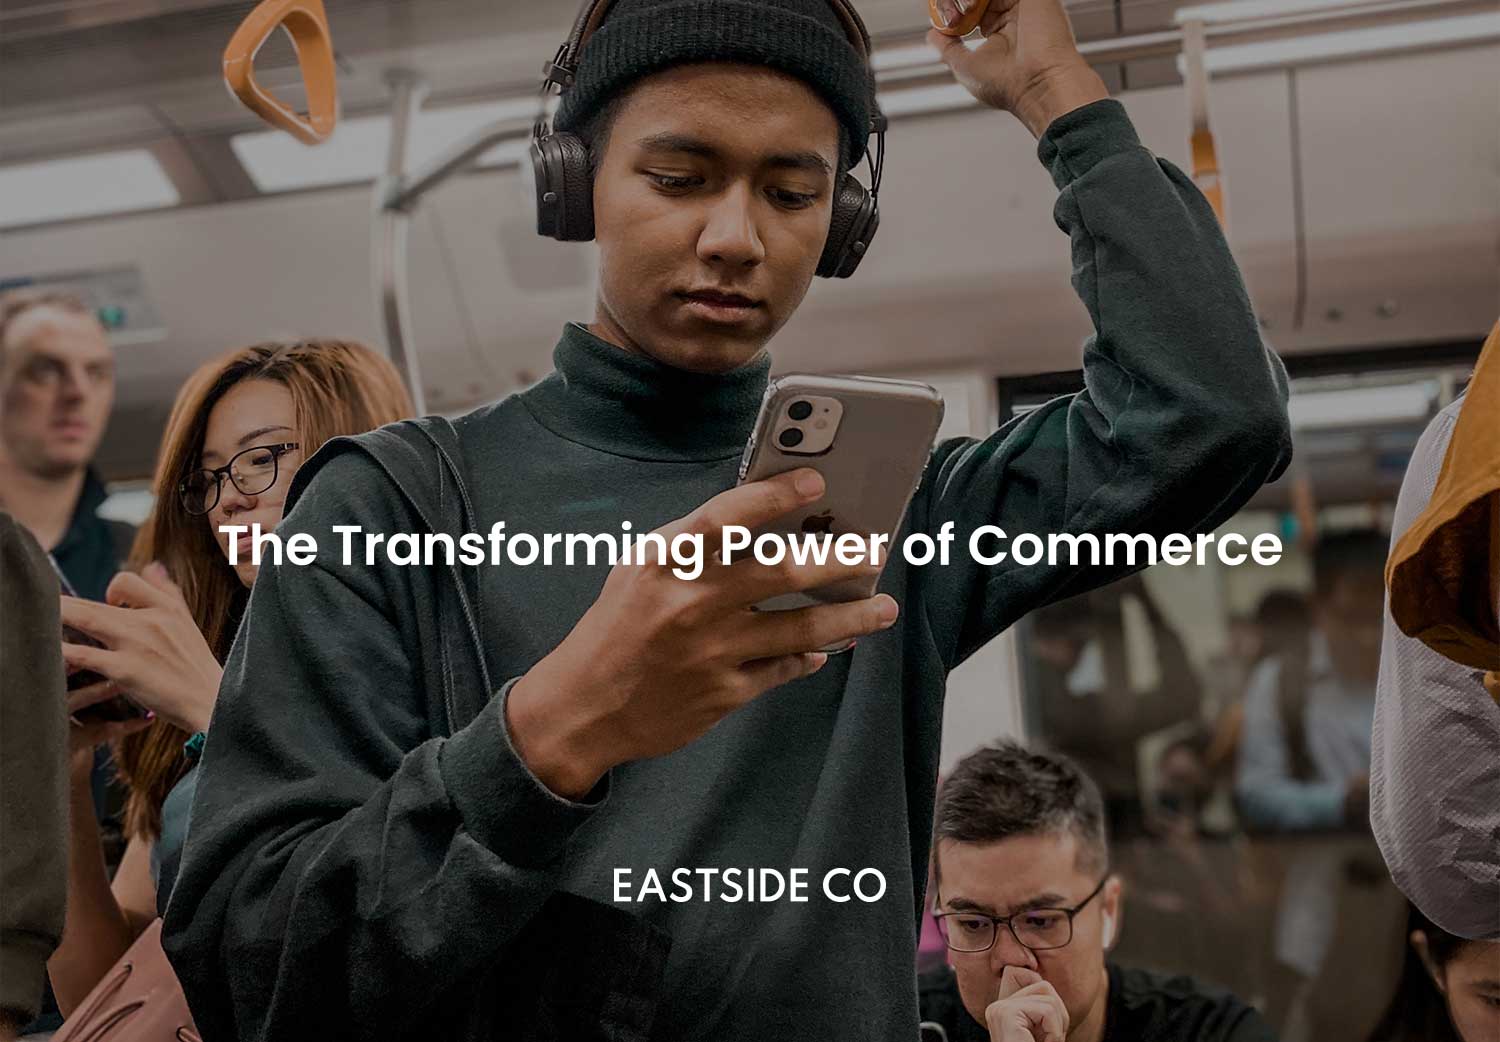 The Transforming Power of Commerce